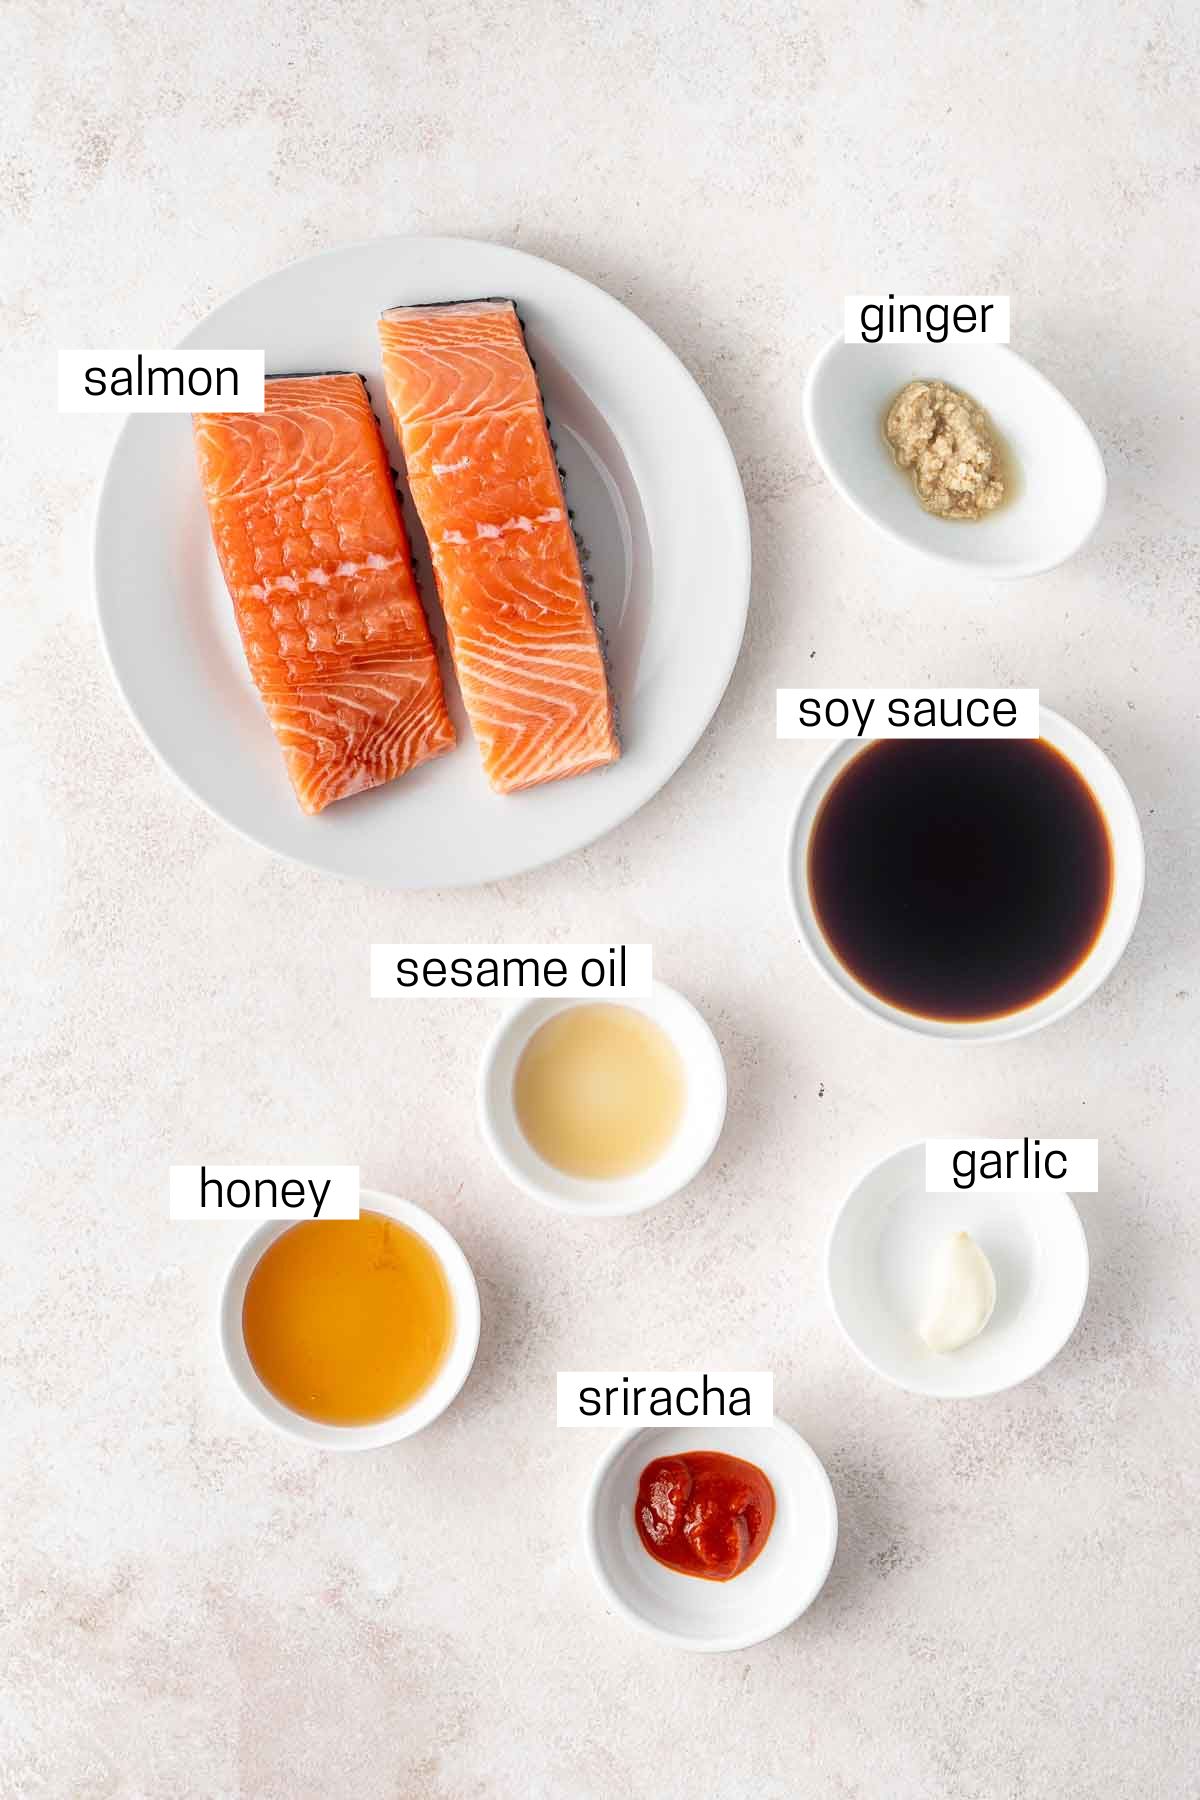 All ingredients needed to make air fryer salmon laid out in small bowls.